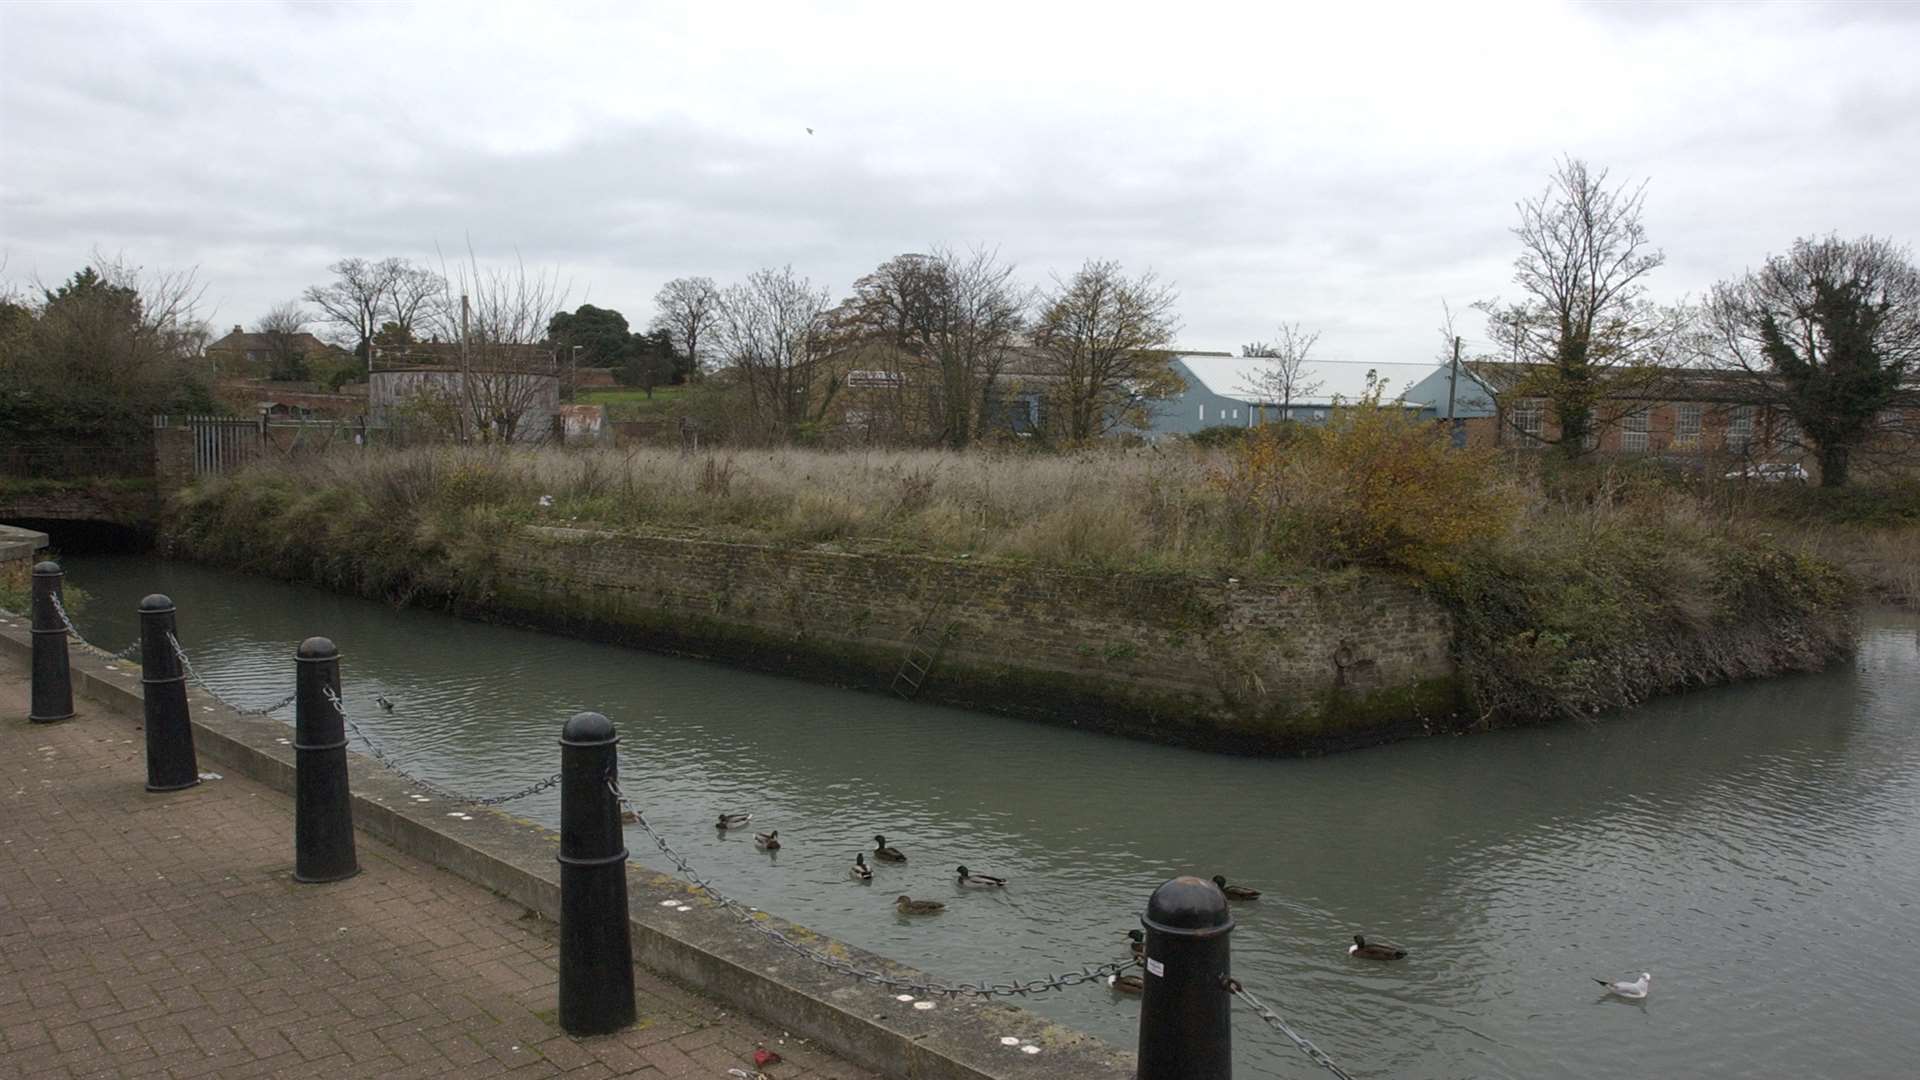 Ordnance Wharf is one of the sites considered in the Creek Neighbourhood Plan.